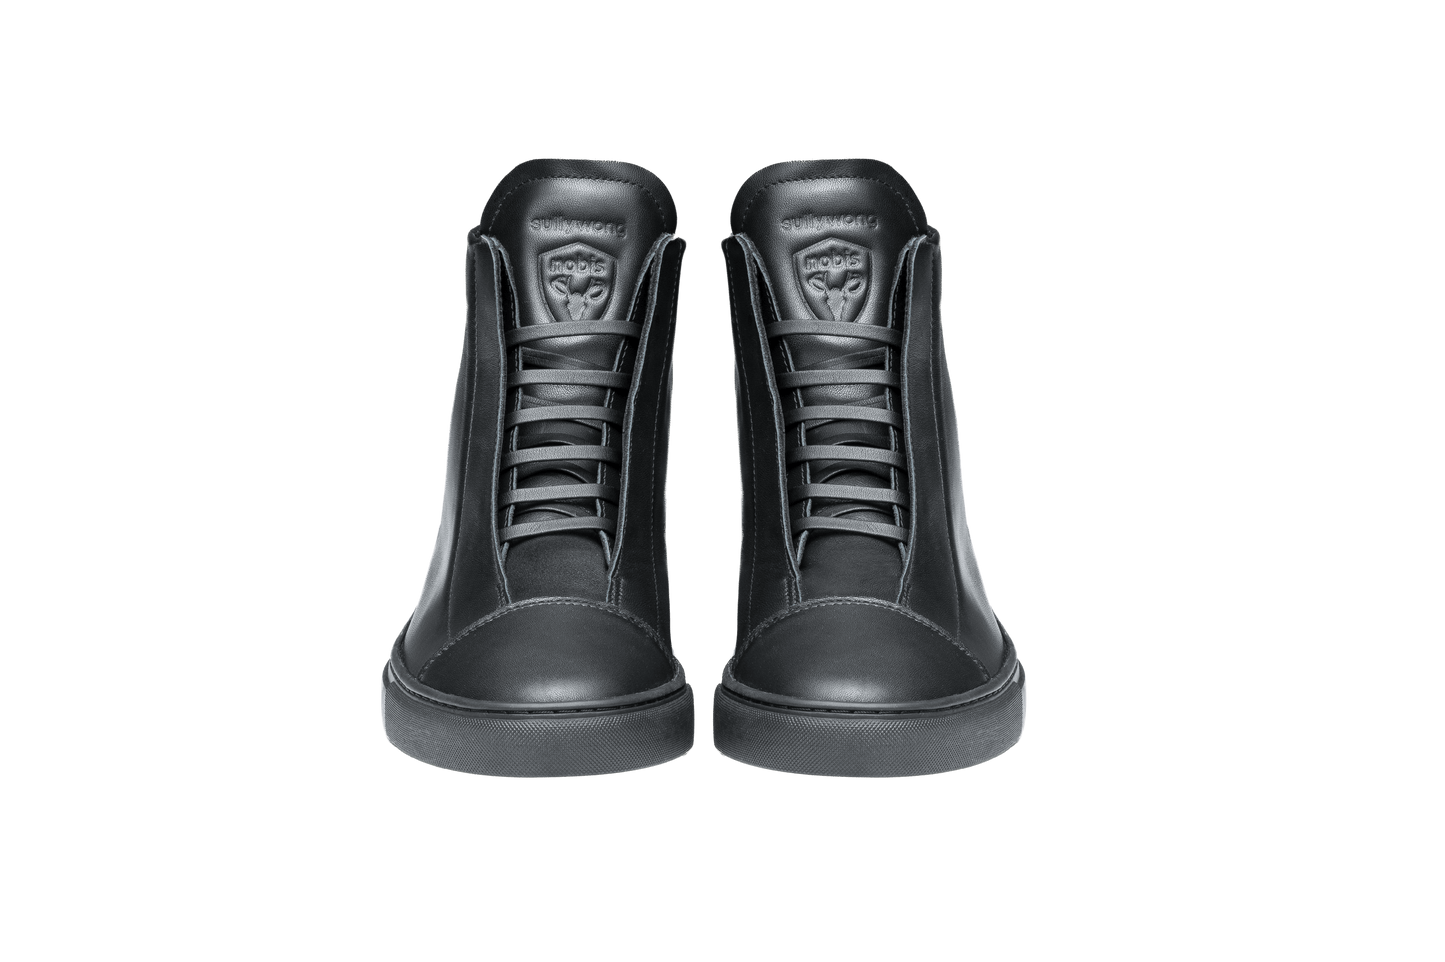 Unisex high top sneaker with Nobis crest embossed on the right side of the shoe in Black